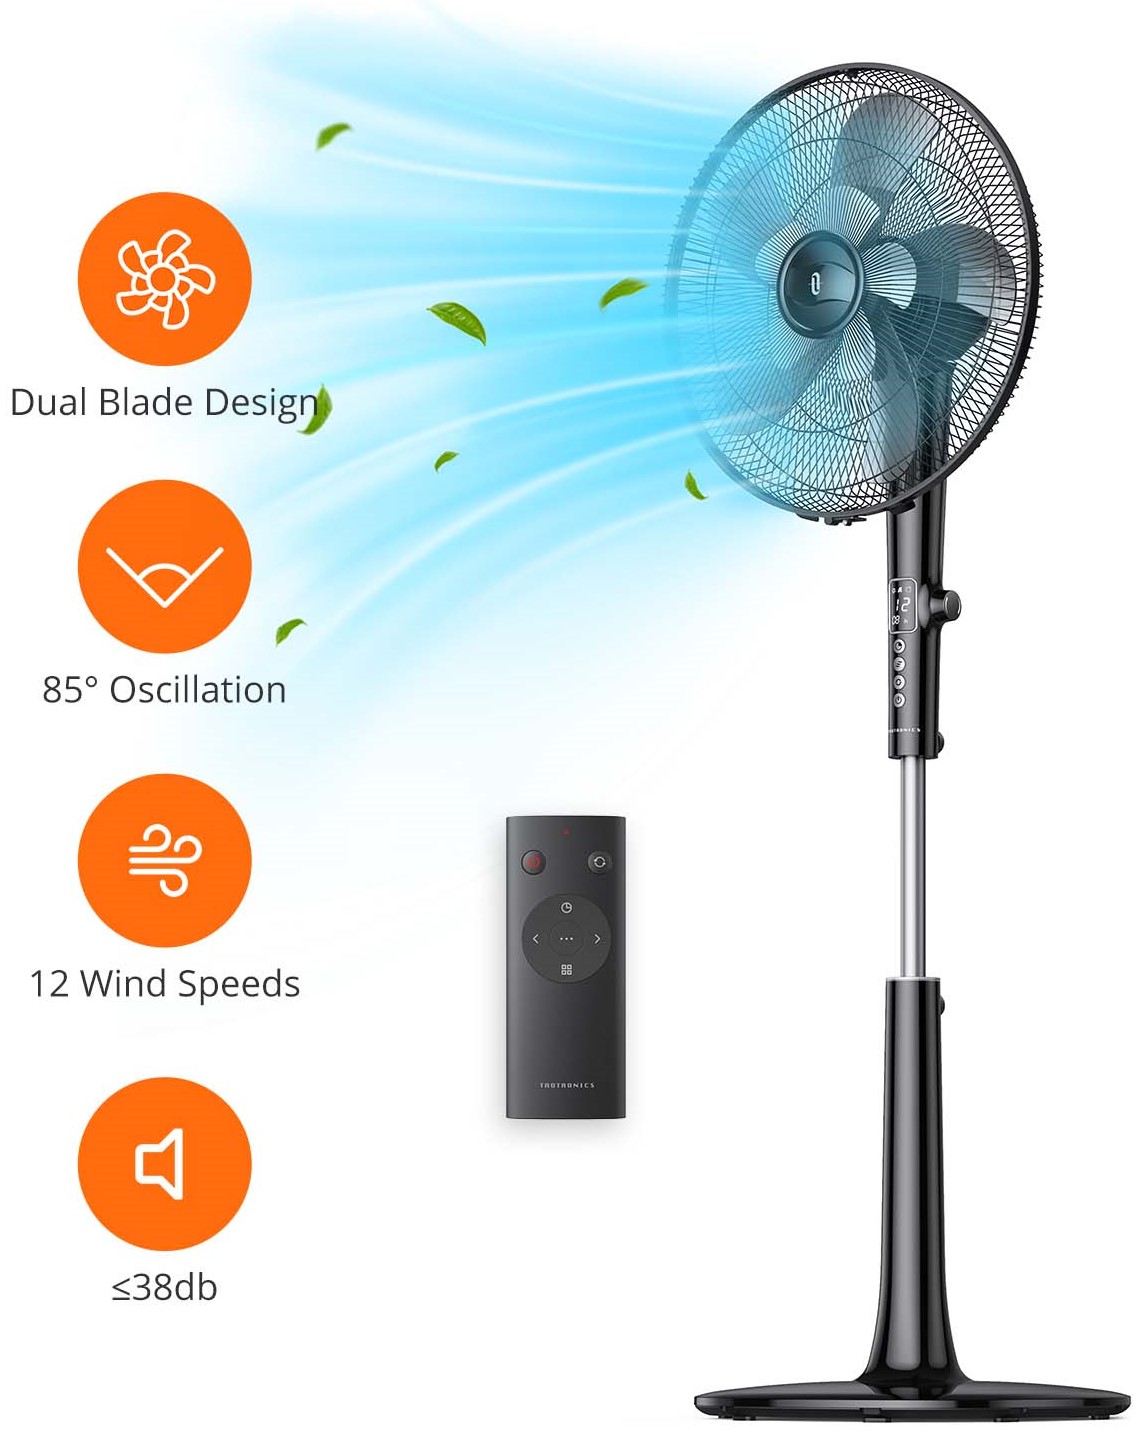 TaoTronics Pedestal Fan, 16" Adjustable Oscillating DC Fan with Remote, 12-Speed, 3-Modes, Less Noise Cooling Fan, Black - image 1 of 9